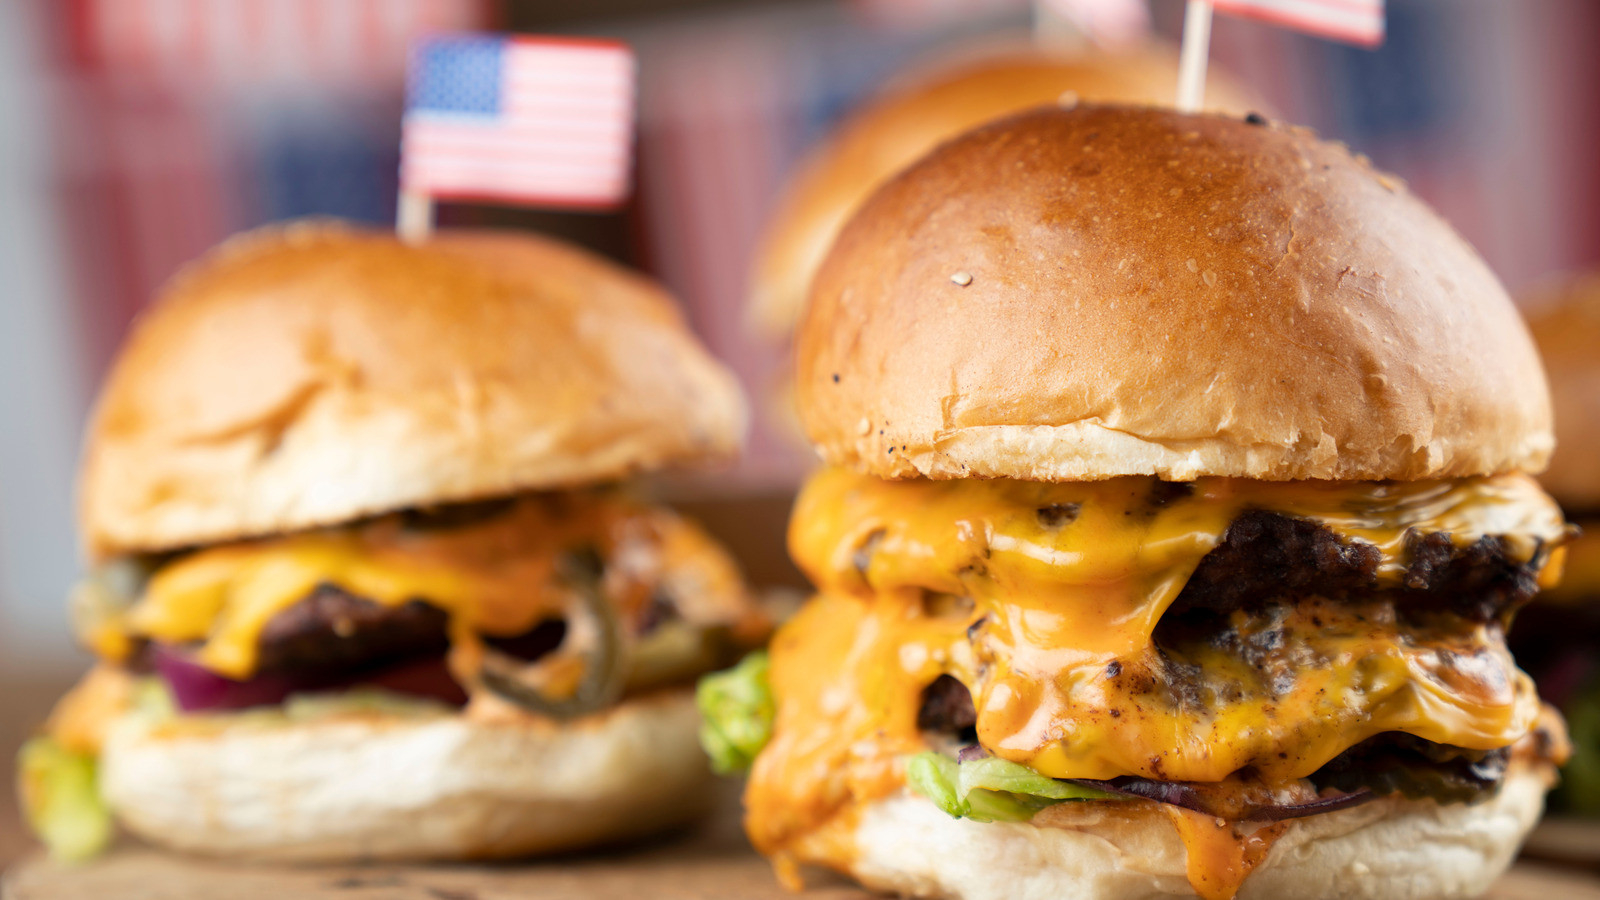 National Burger Day 2021: Where To Get The Best Food-National Food Holidays 2021